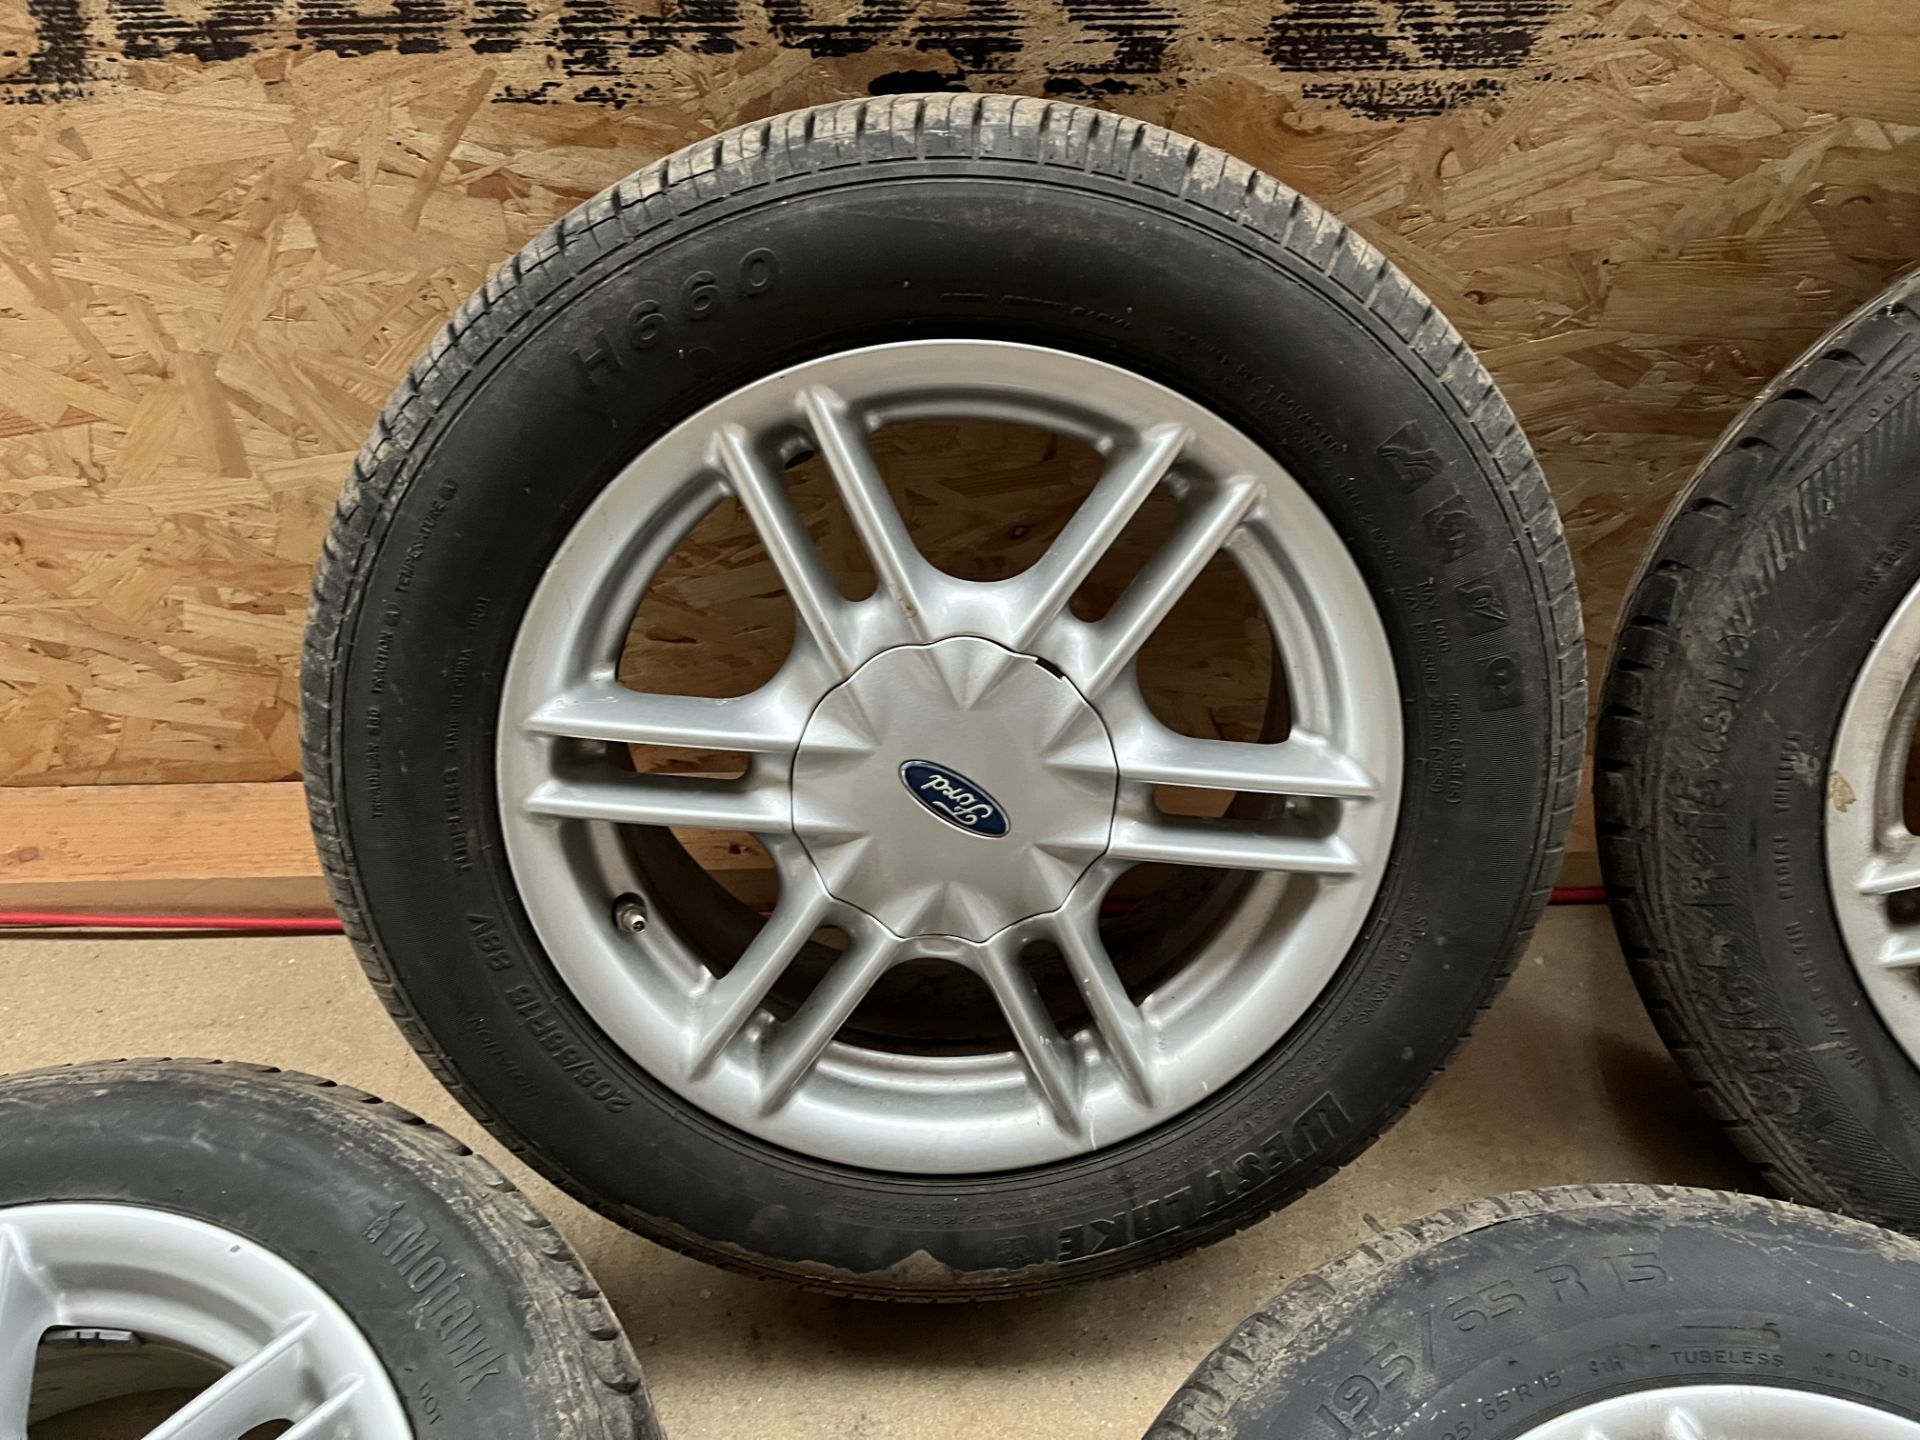 MKII Ford Mondeo Wheels - Image 4 of 5